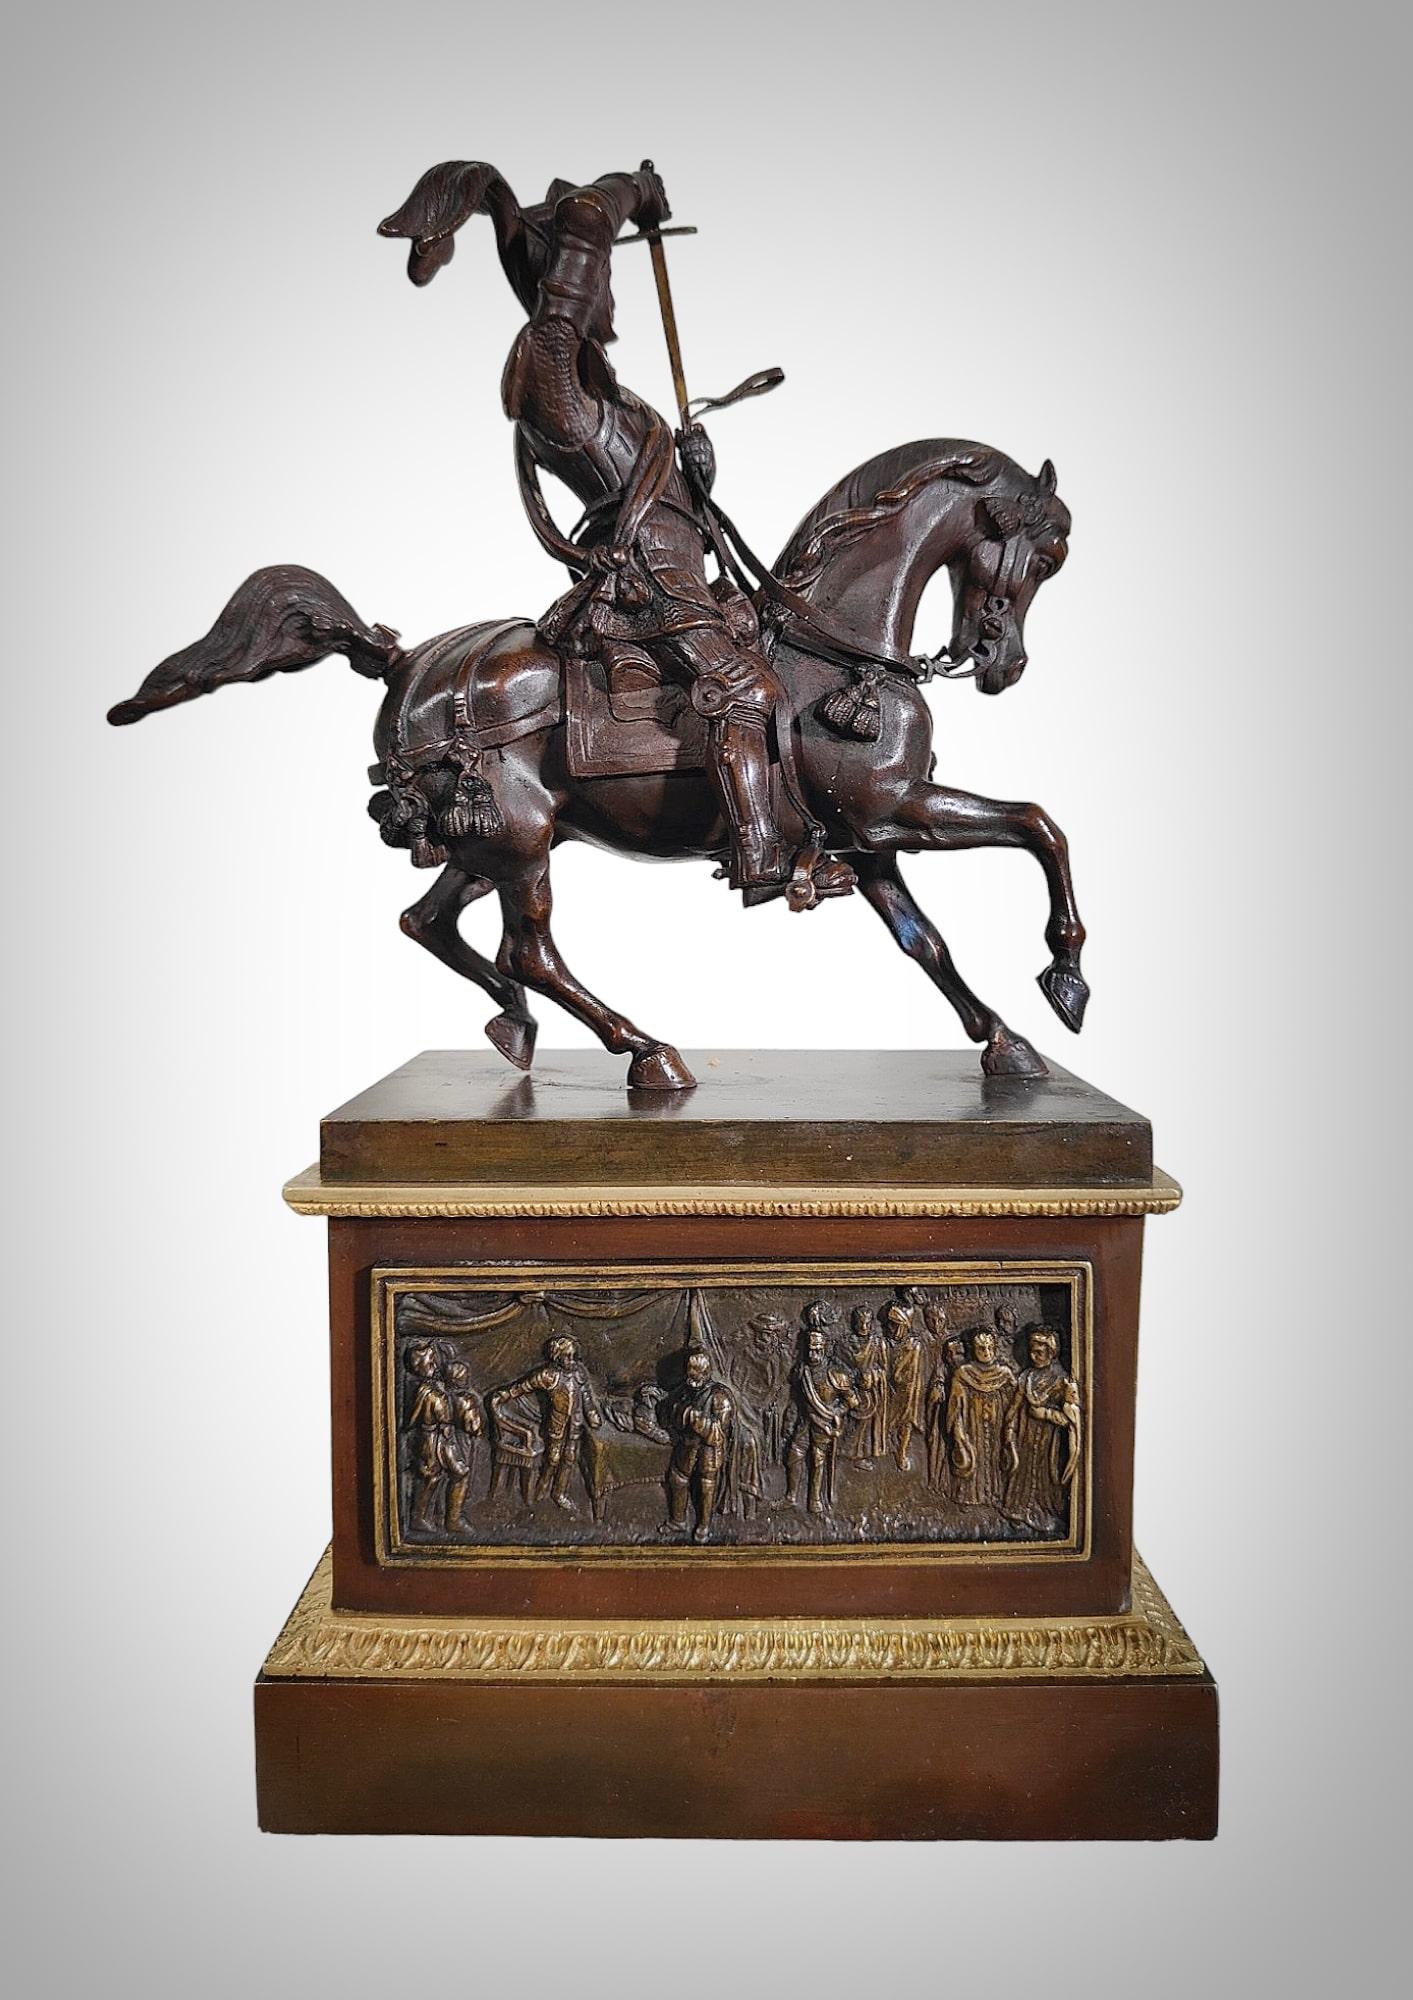 Discover a true gem of 19th-century sculpture with this spectacular bronze statue of the Duke of Savoy, a masterpiece by the renowned sculptor Carlo Marochetti!

Imagine the imposing presence of this noble figure, mounted on a majestic war steed,